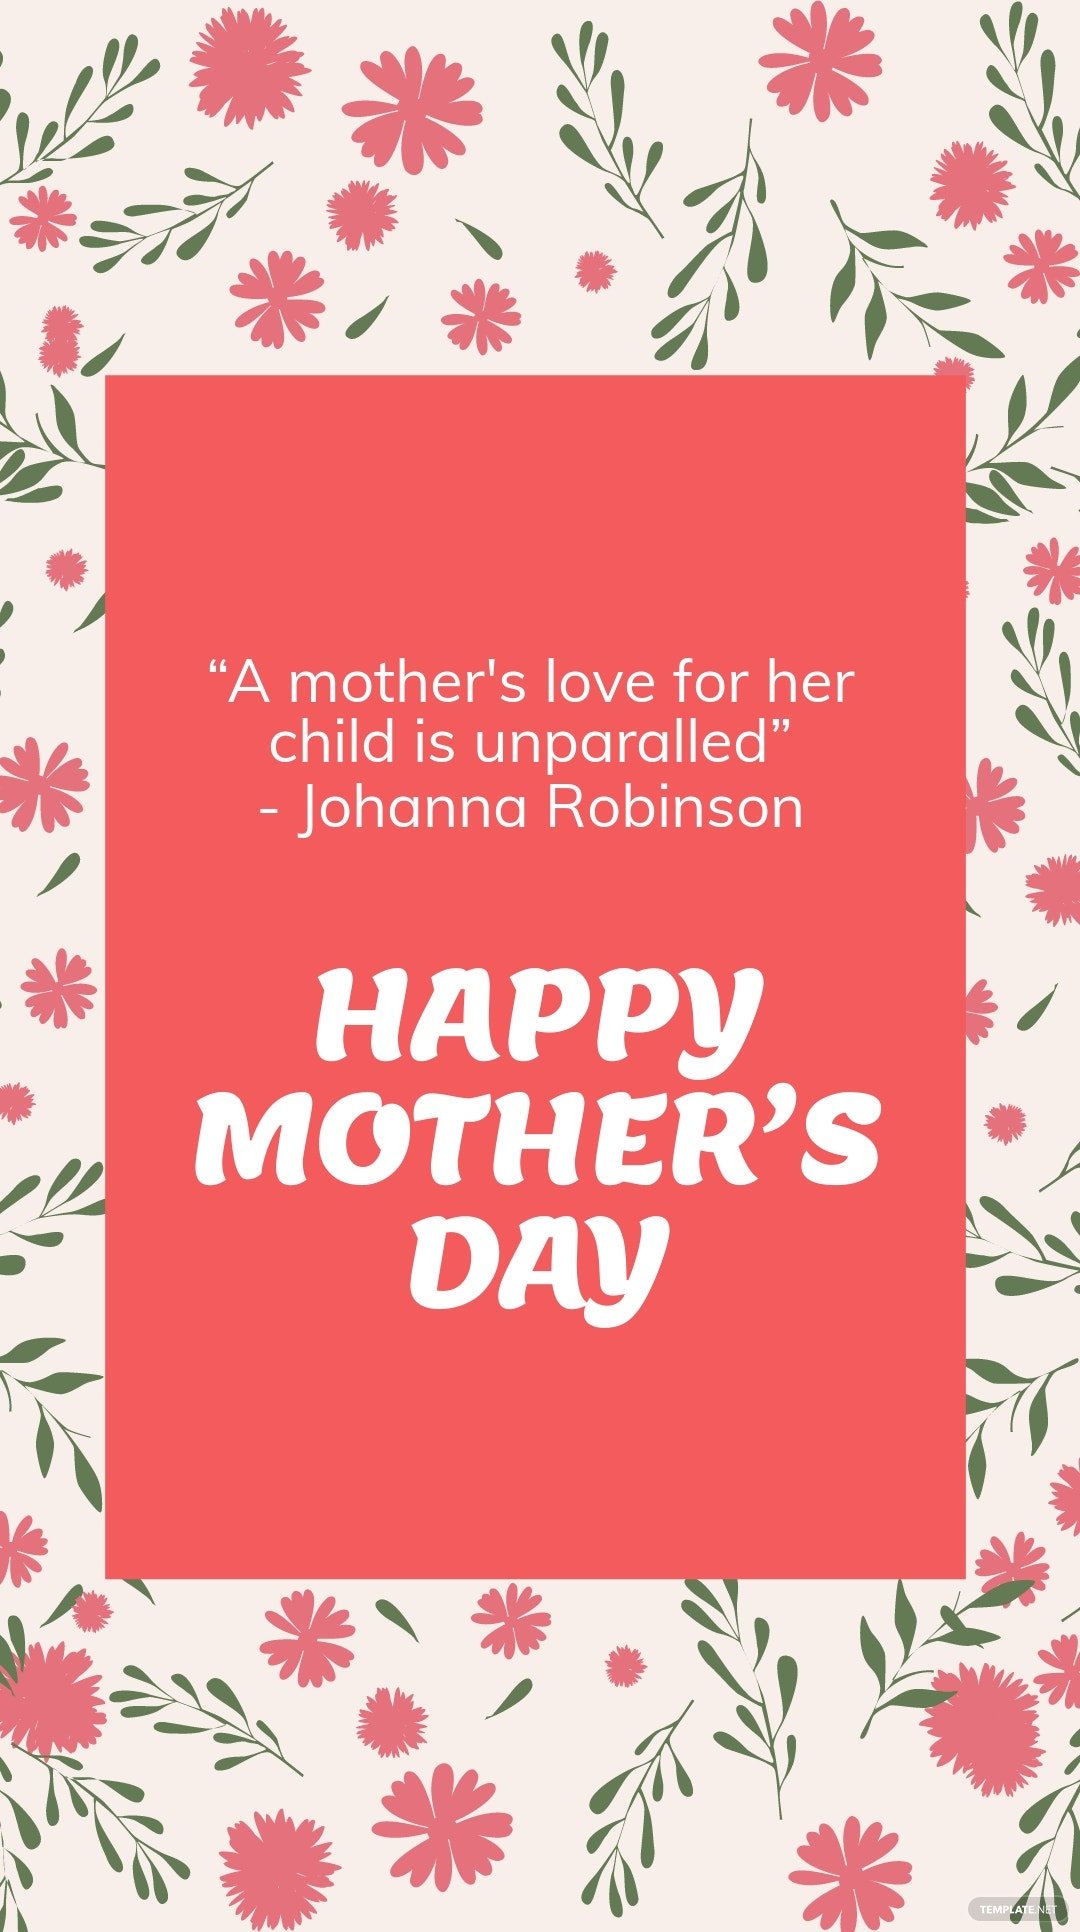 mothers-day-quote-whatsapp-post-template